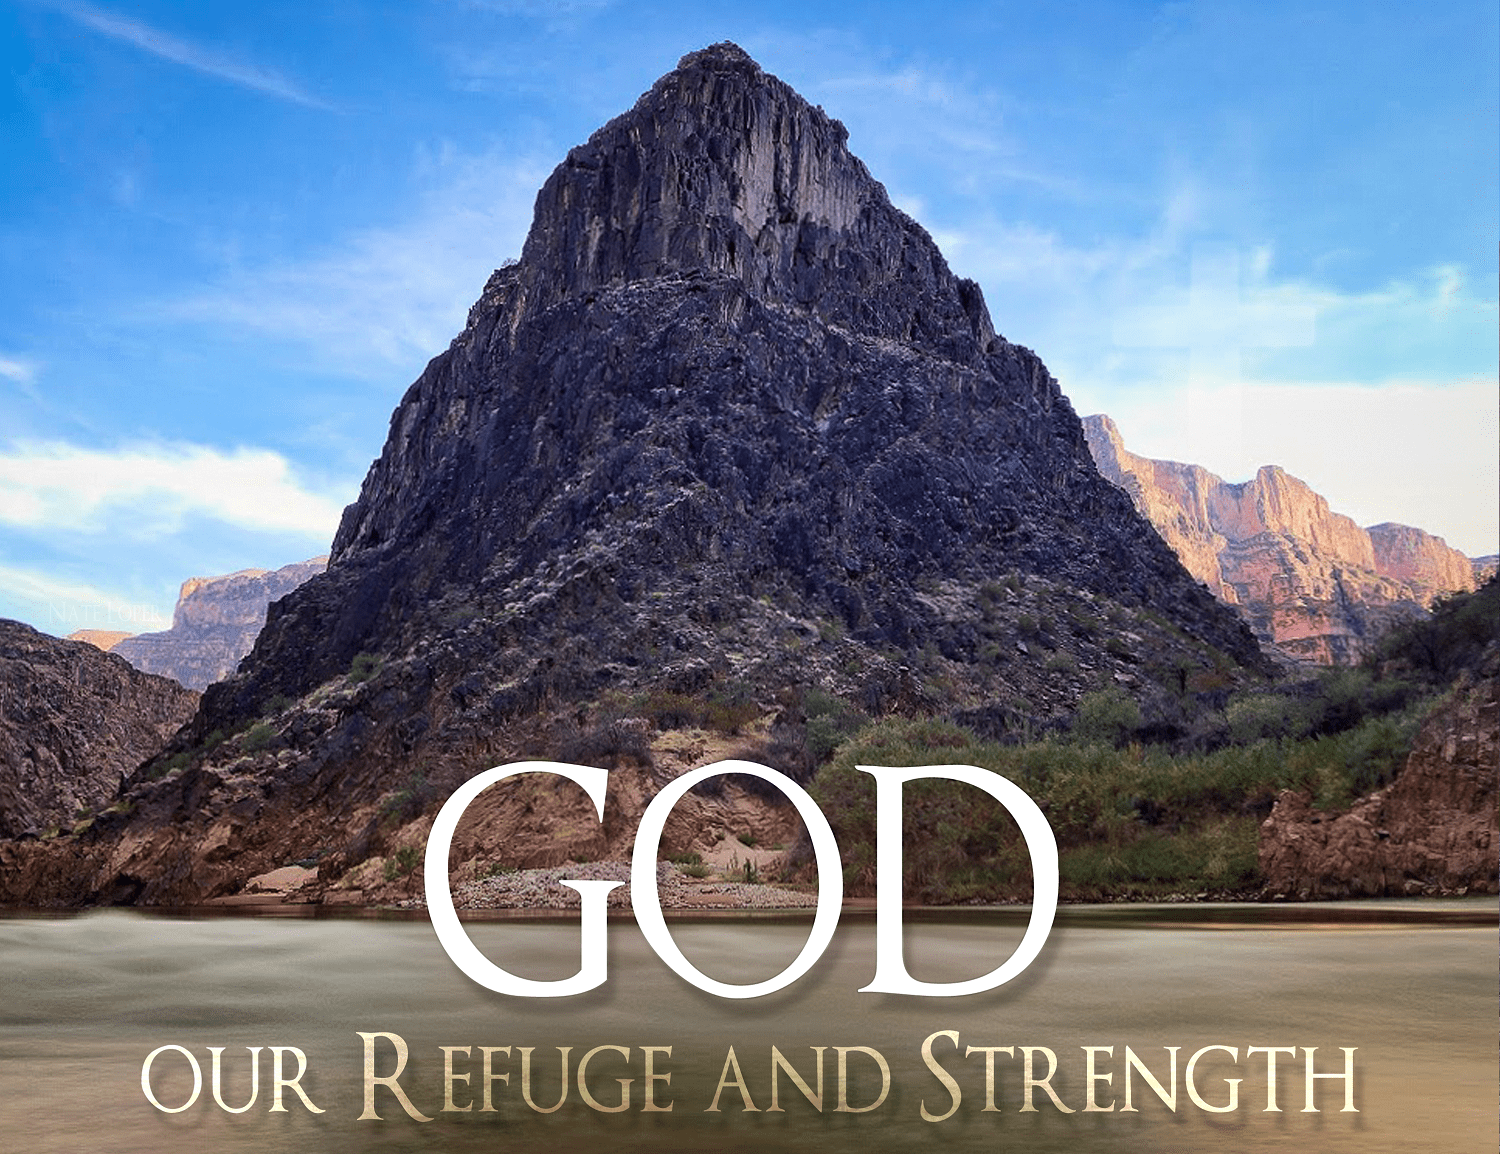 Separation Canyon with "God is our Refuge and Strength"